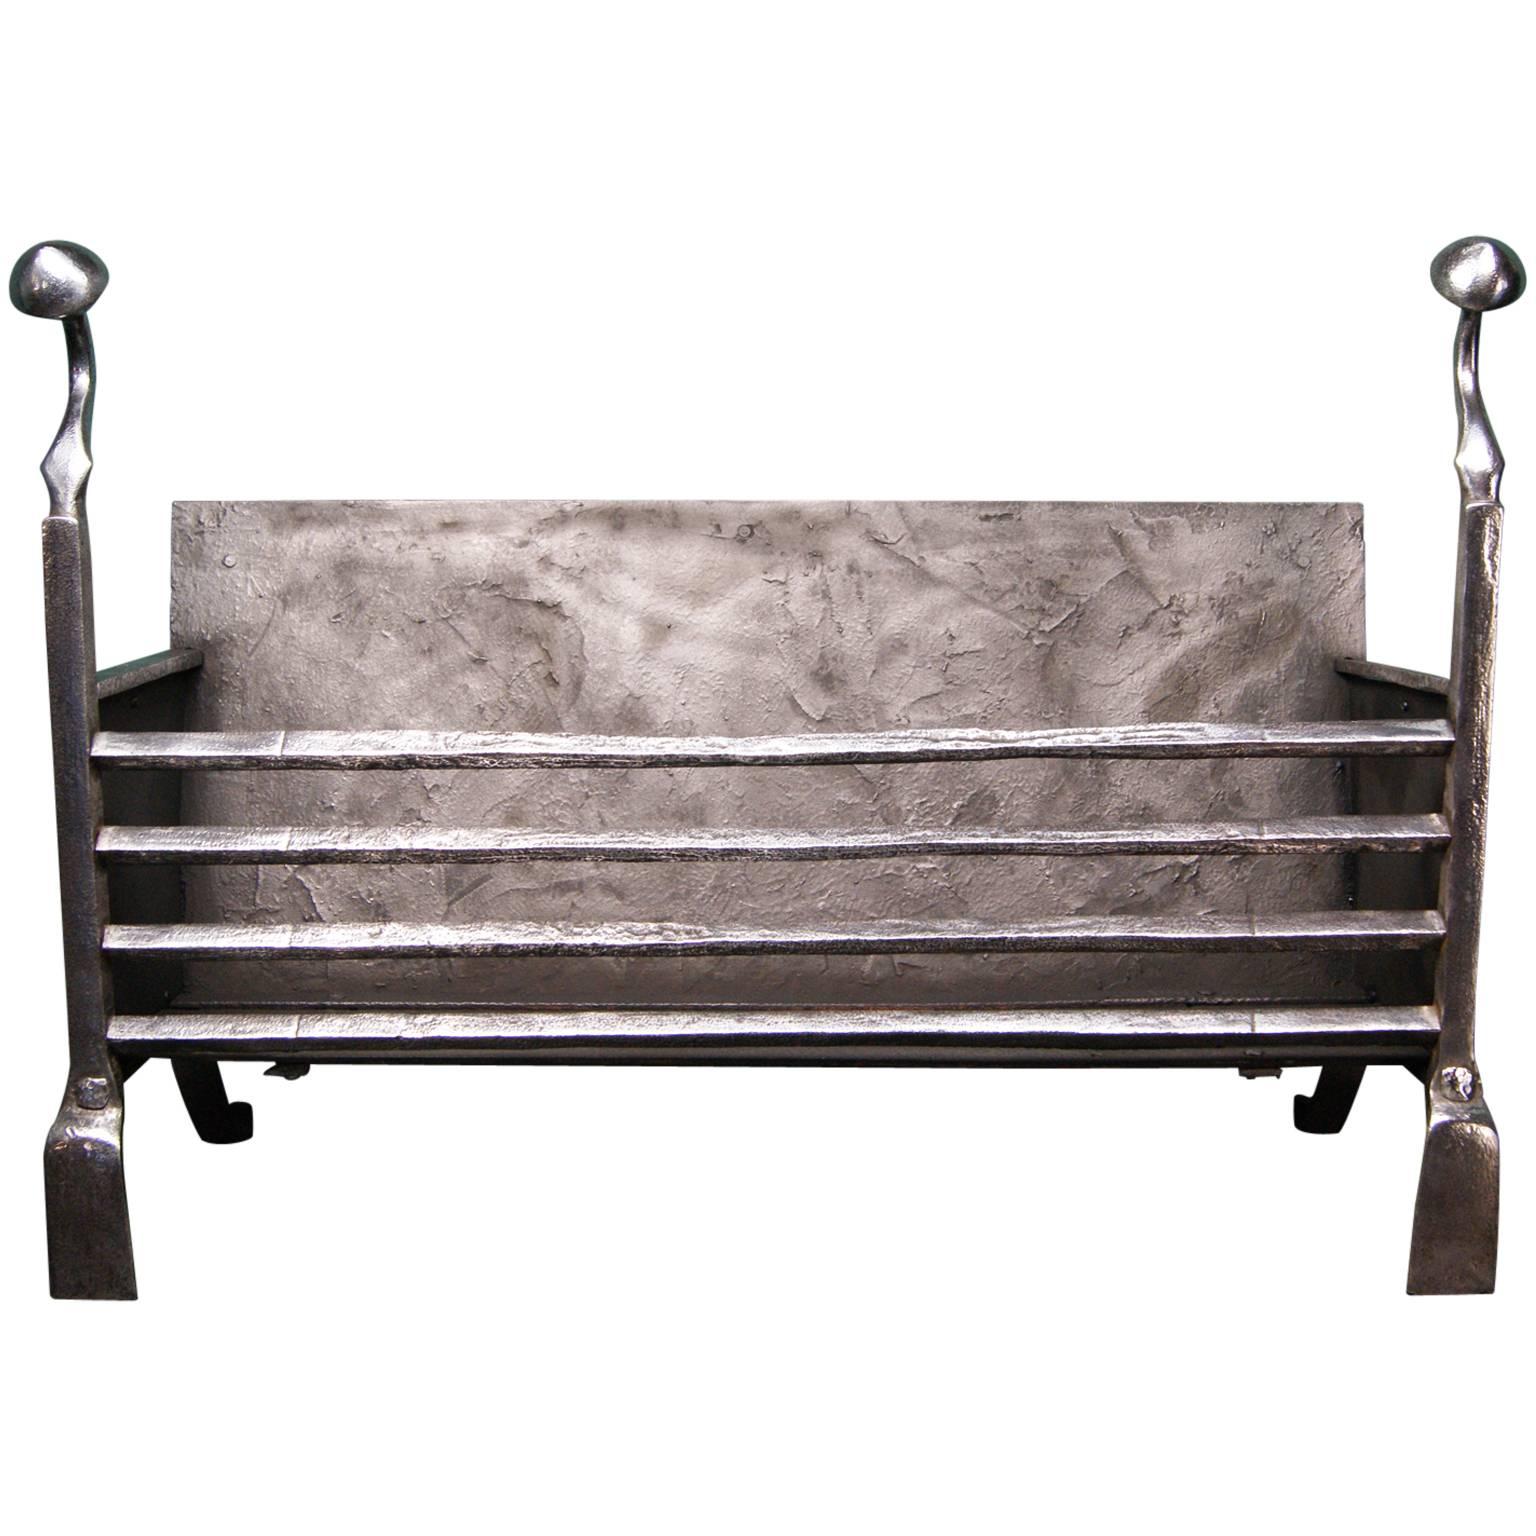 Large Polished Wrought 18th Century Fire Basket Fire Grate For Sale